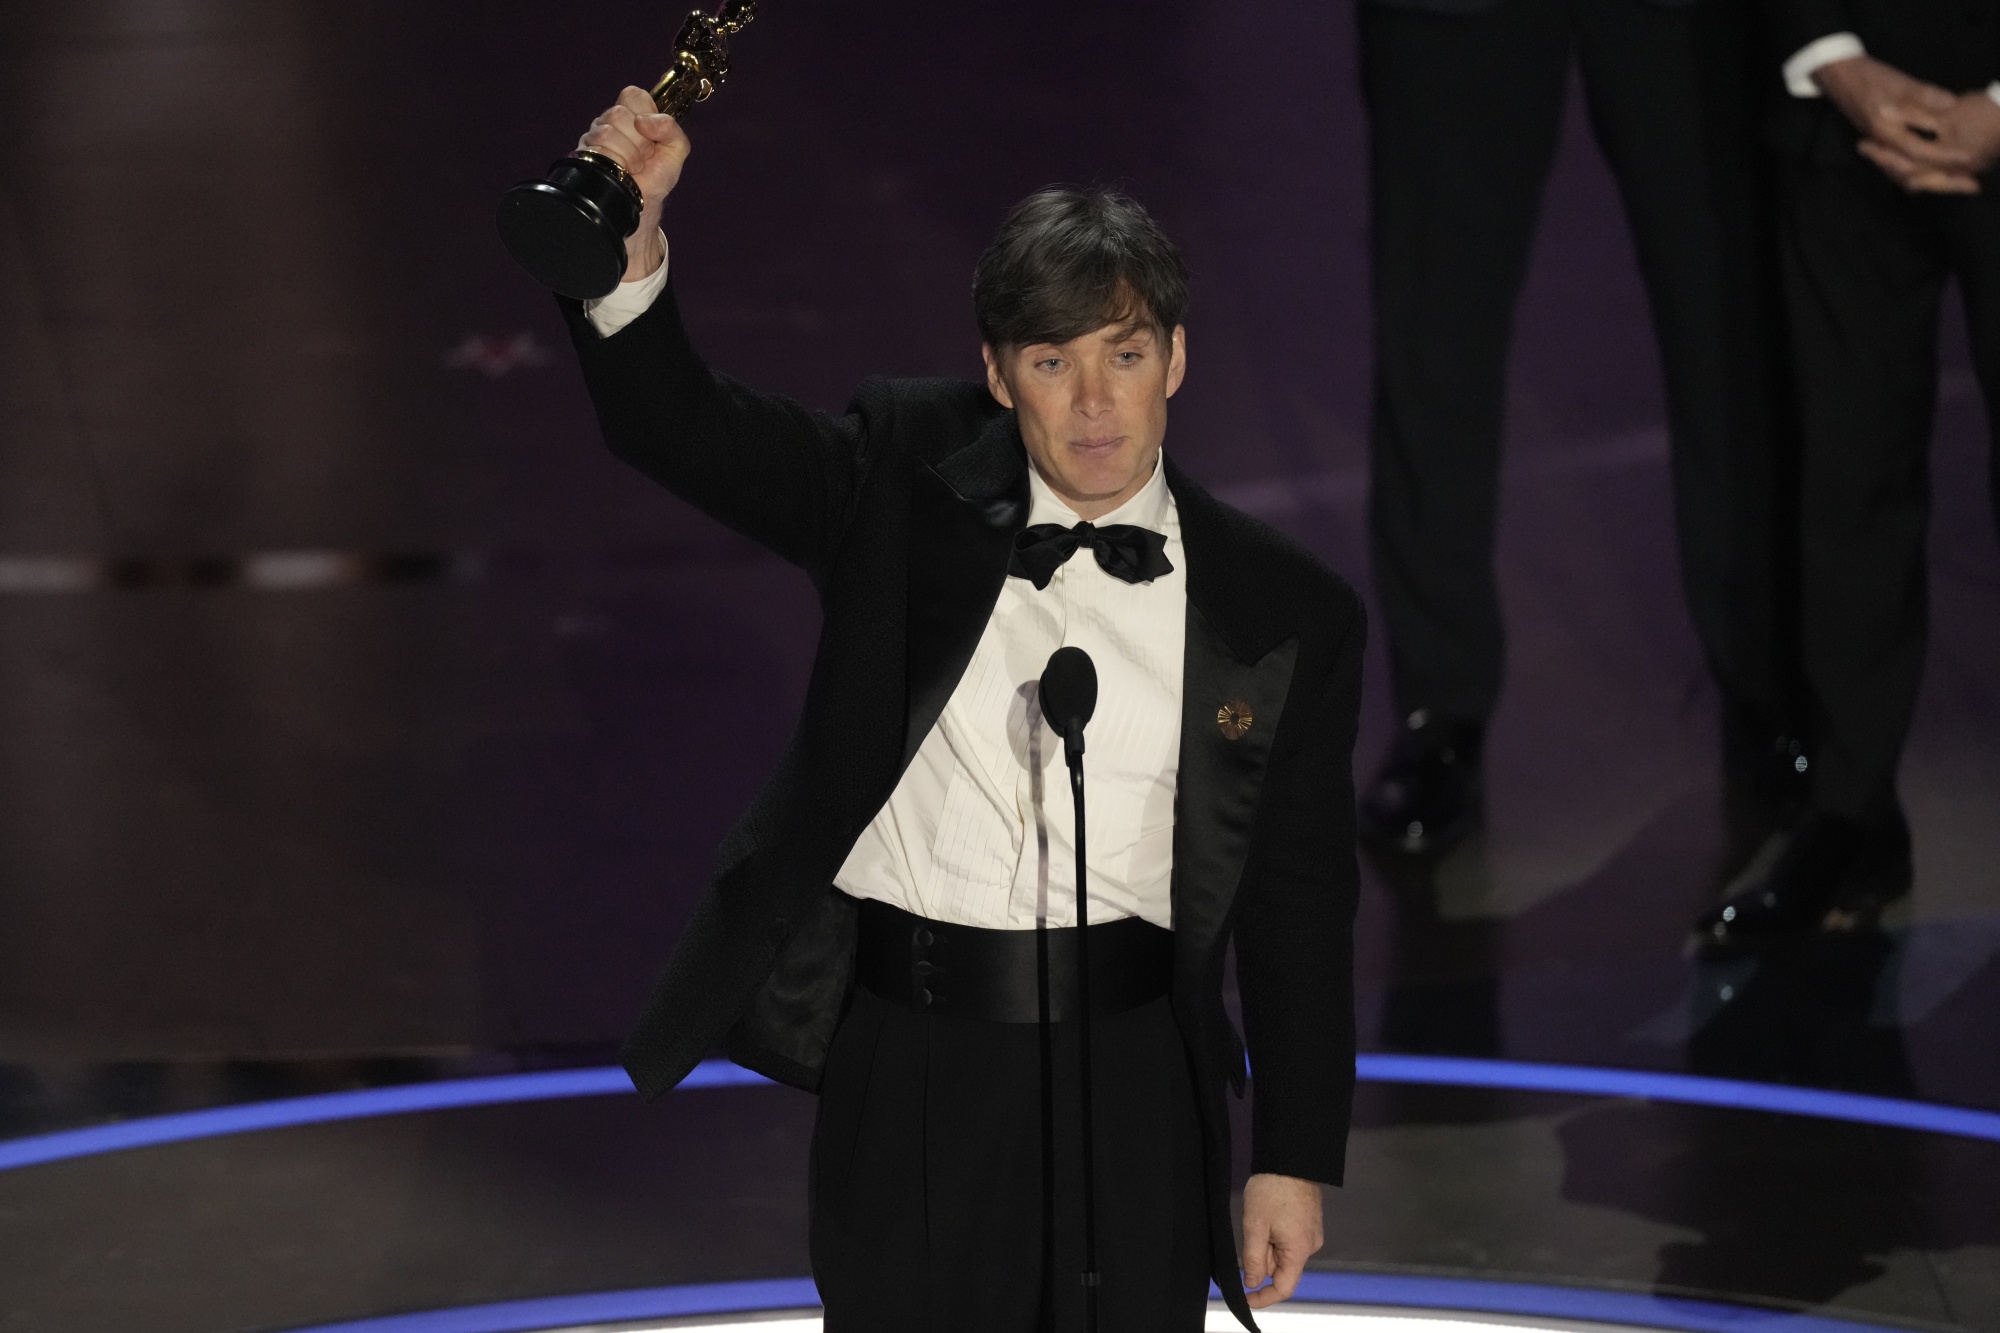 URGENT Cillian Murphy wins his first best actor Oscar for role in